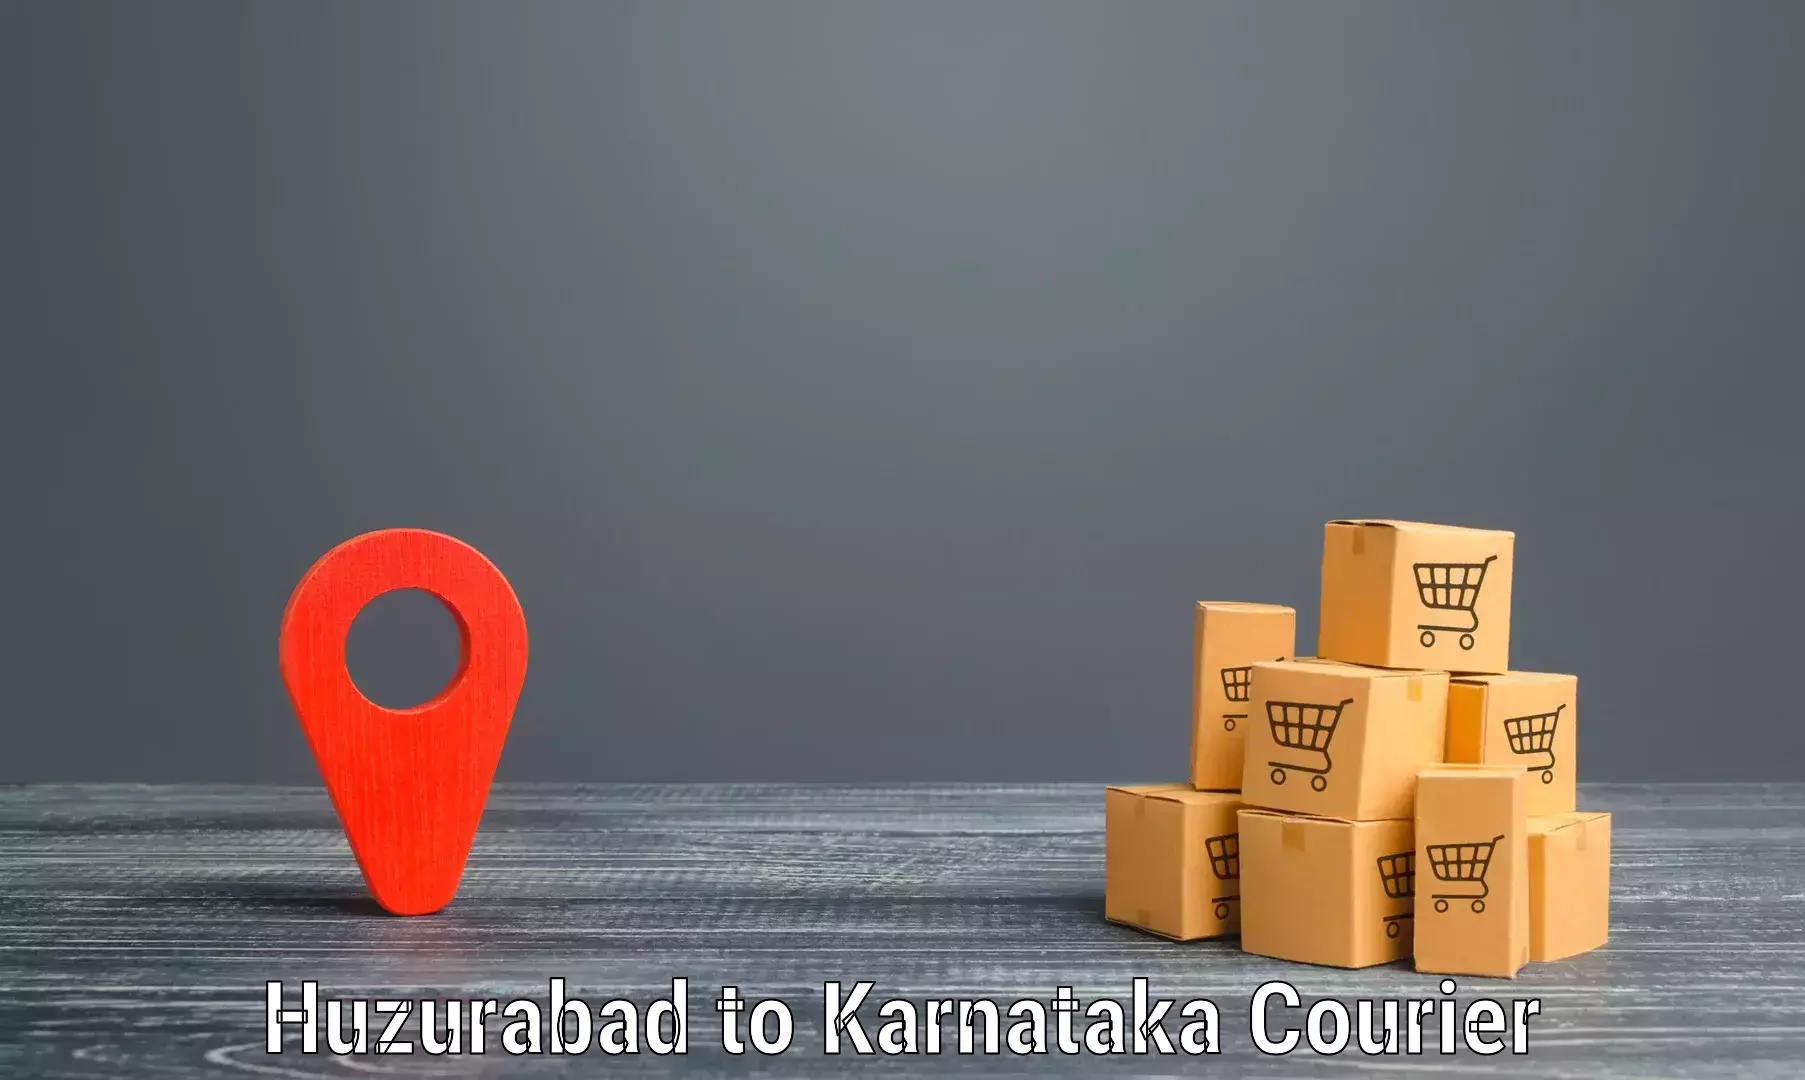 Easy access courier services in Huzurabad to Sirsi